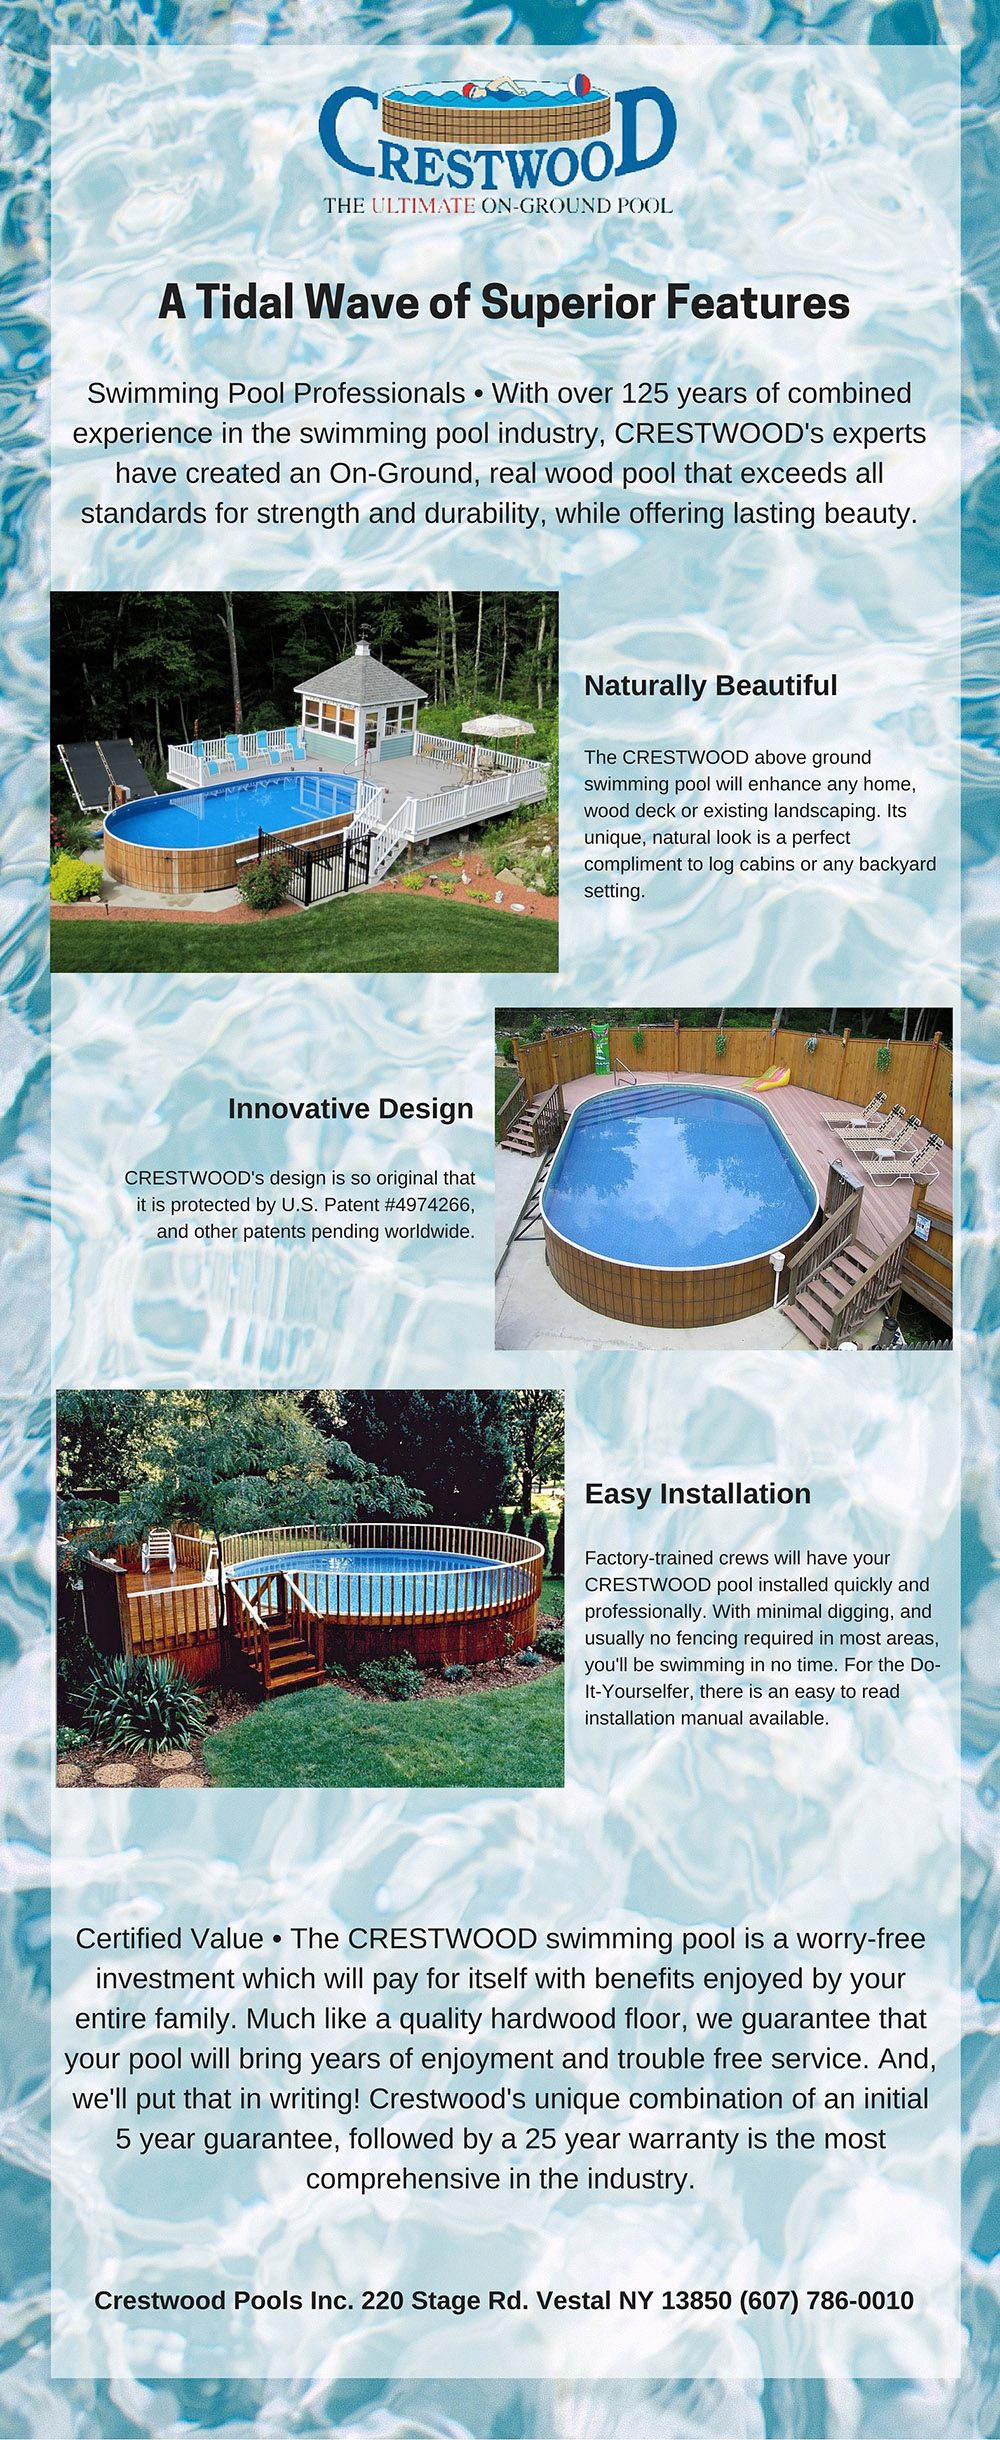 Crestwood Pool, above ground pool, American made pool, made in usa pool, made in america pool,